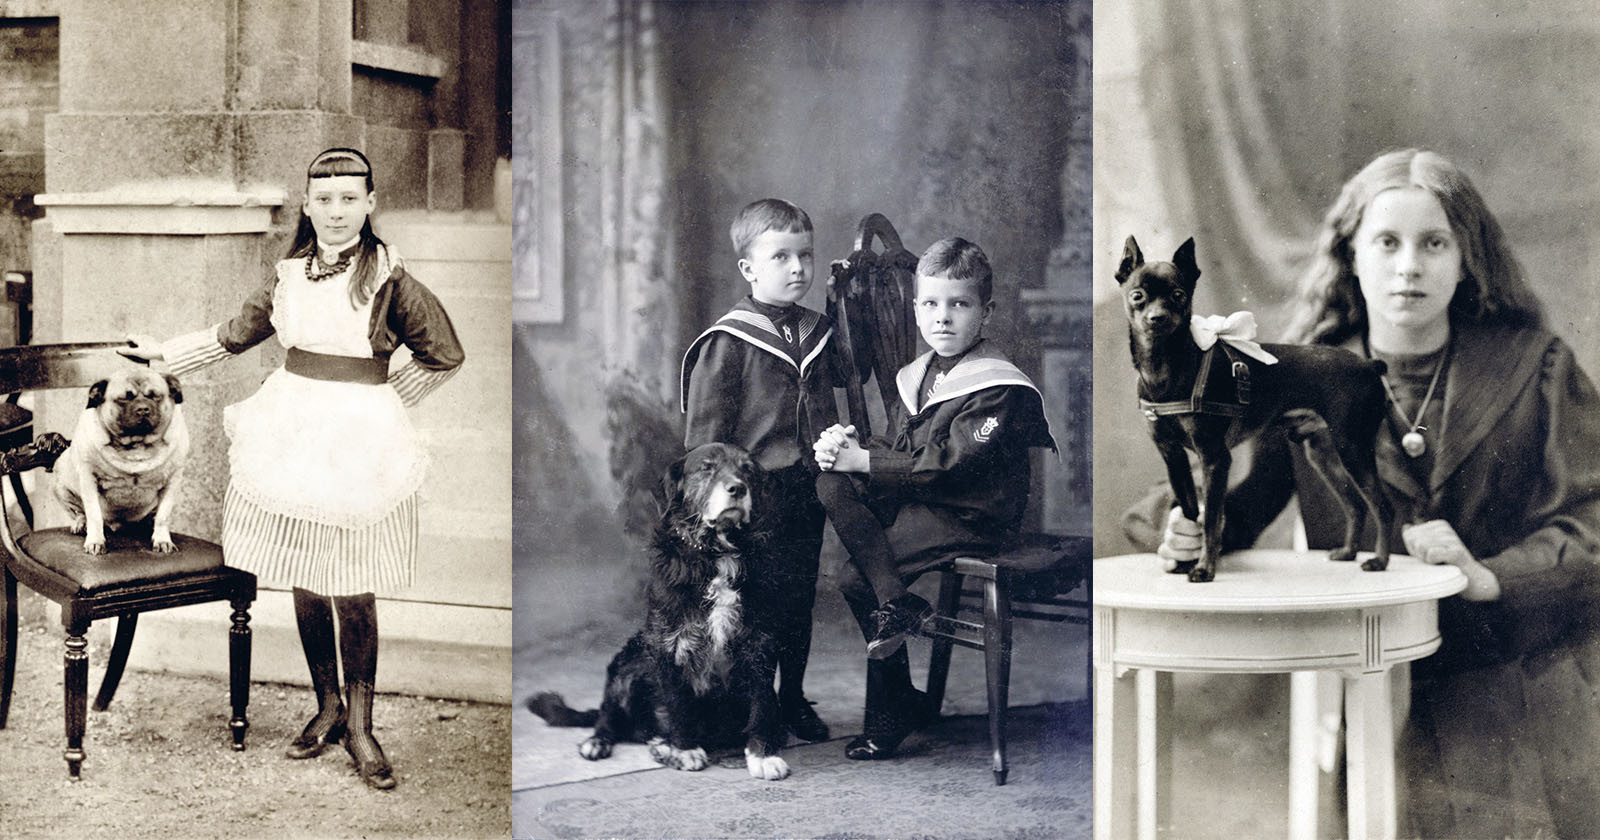 Centuries Old Photographs Show Our Immortal Love of Dogs